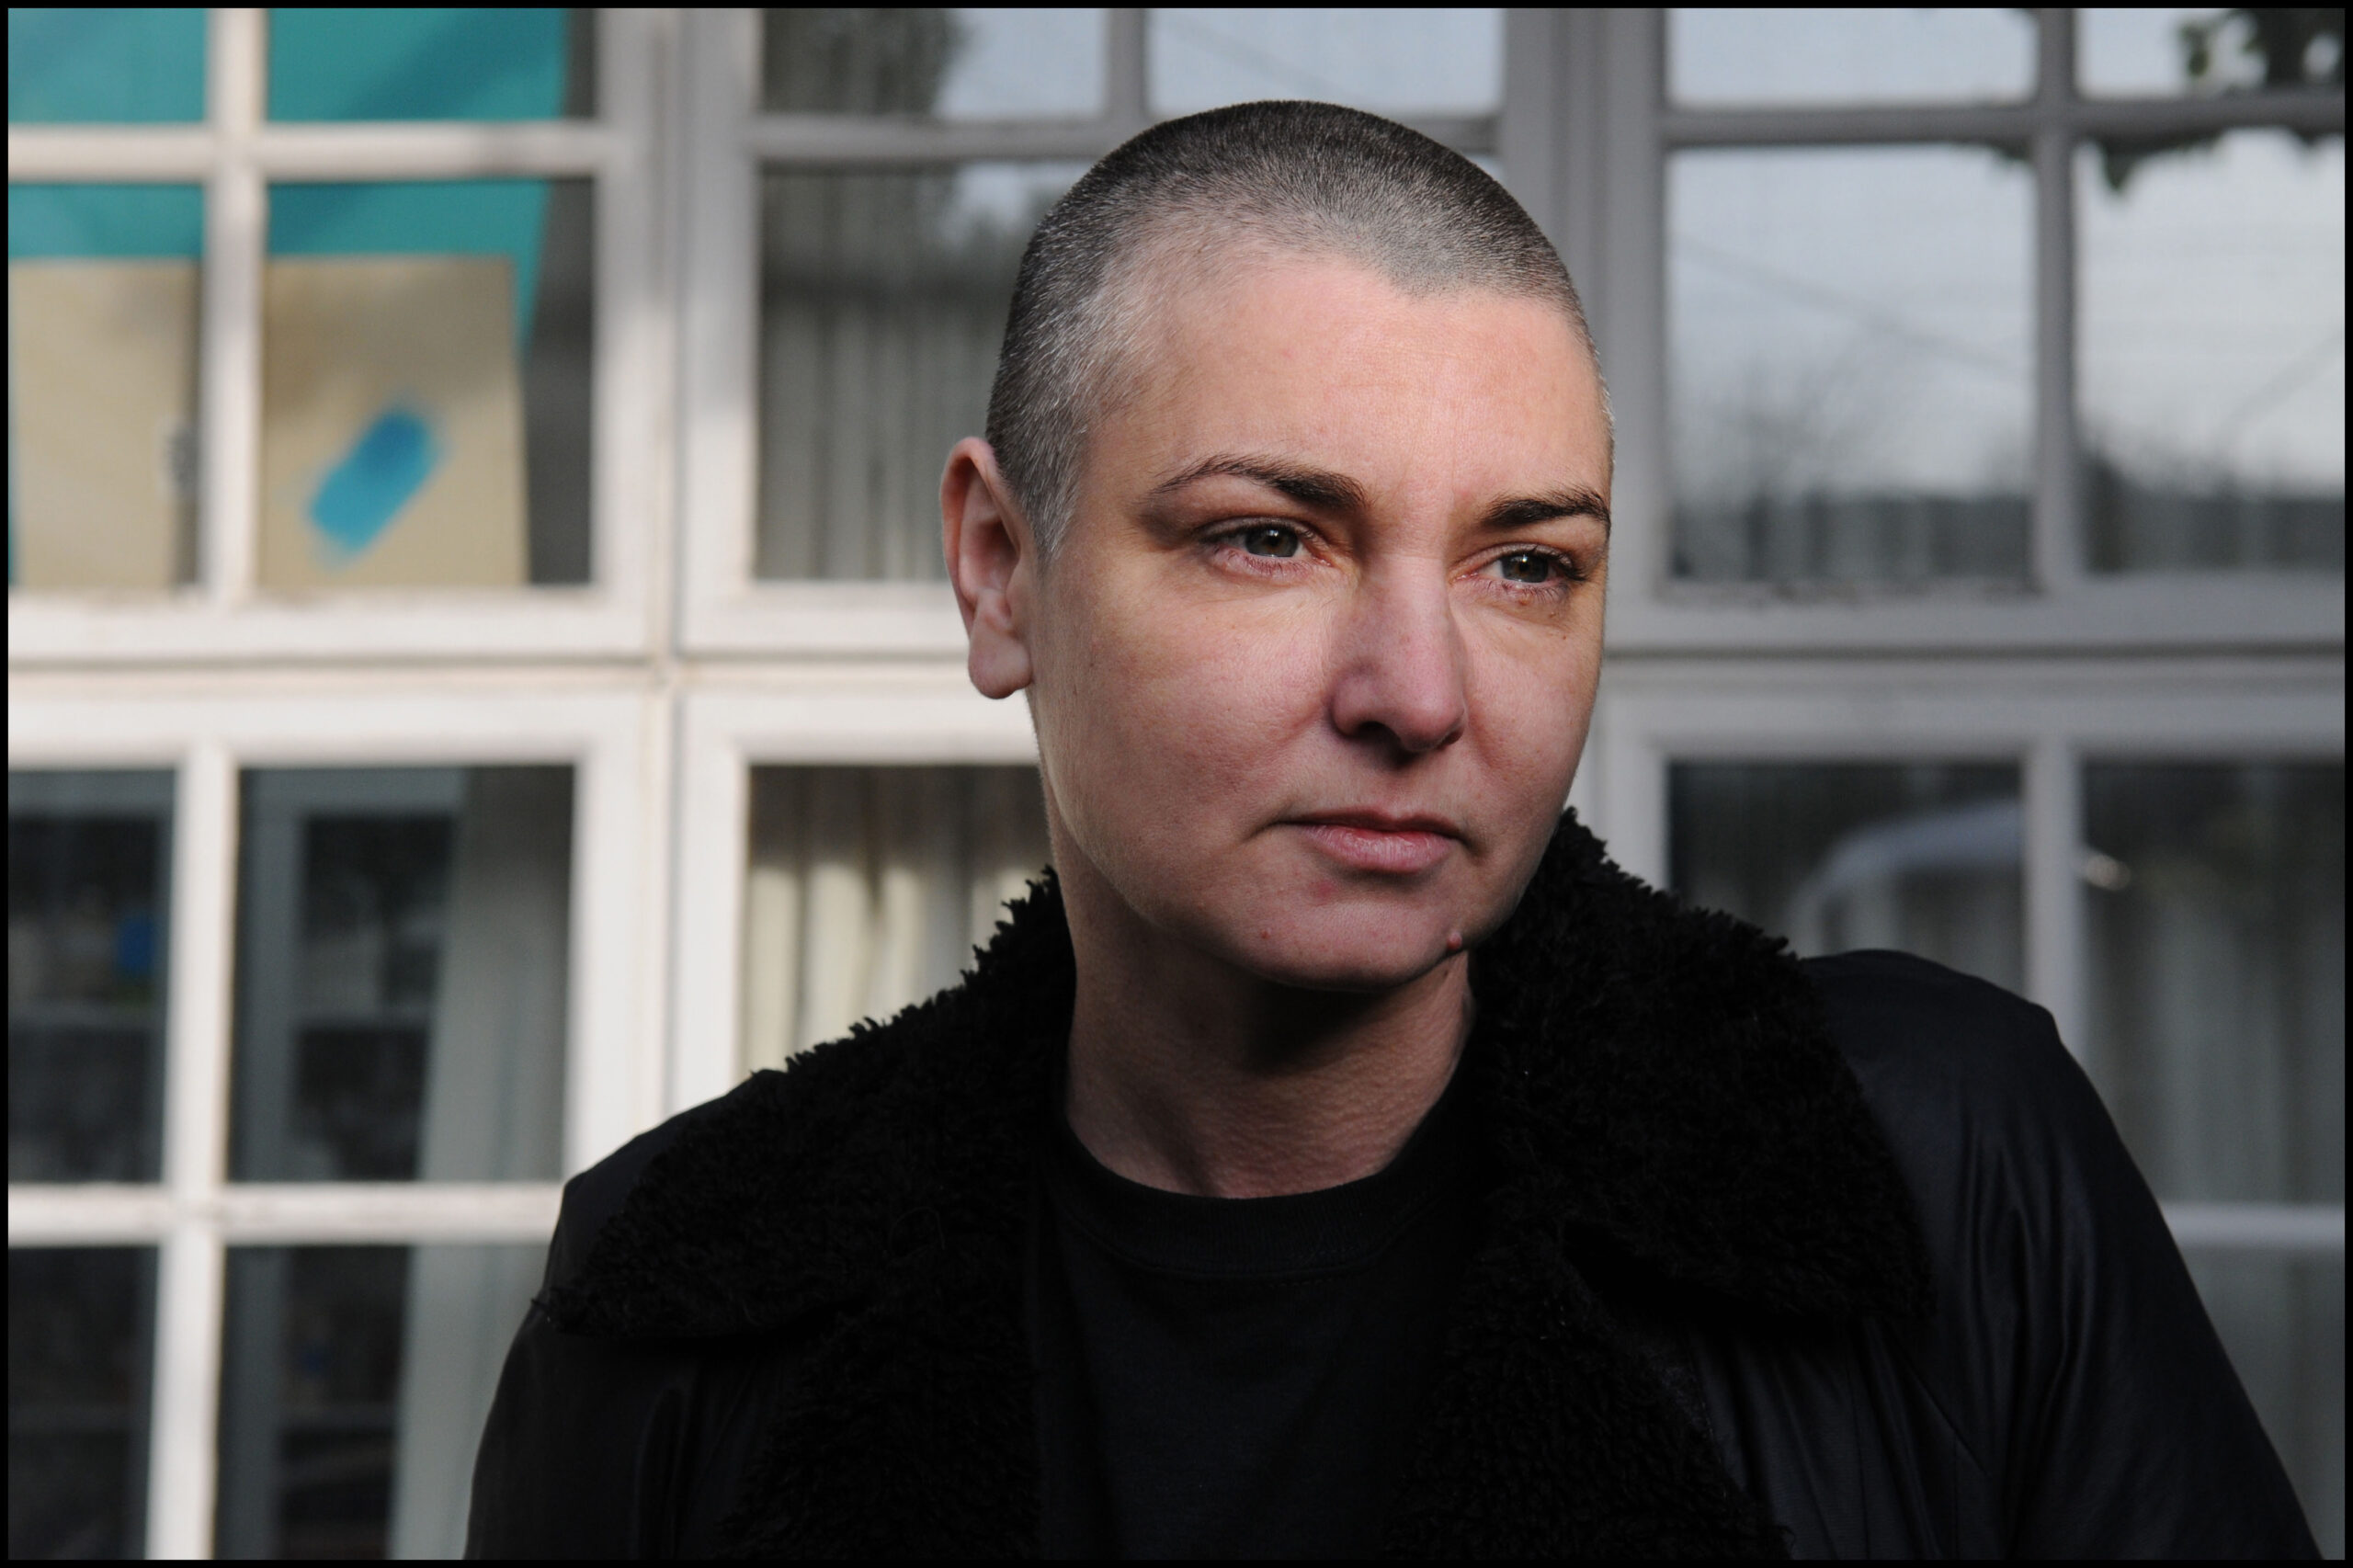 Sinead O’Connor: Honoring The Legacy Of An Iconic Musician